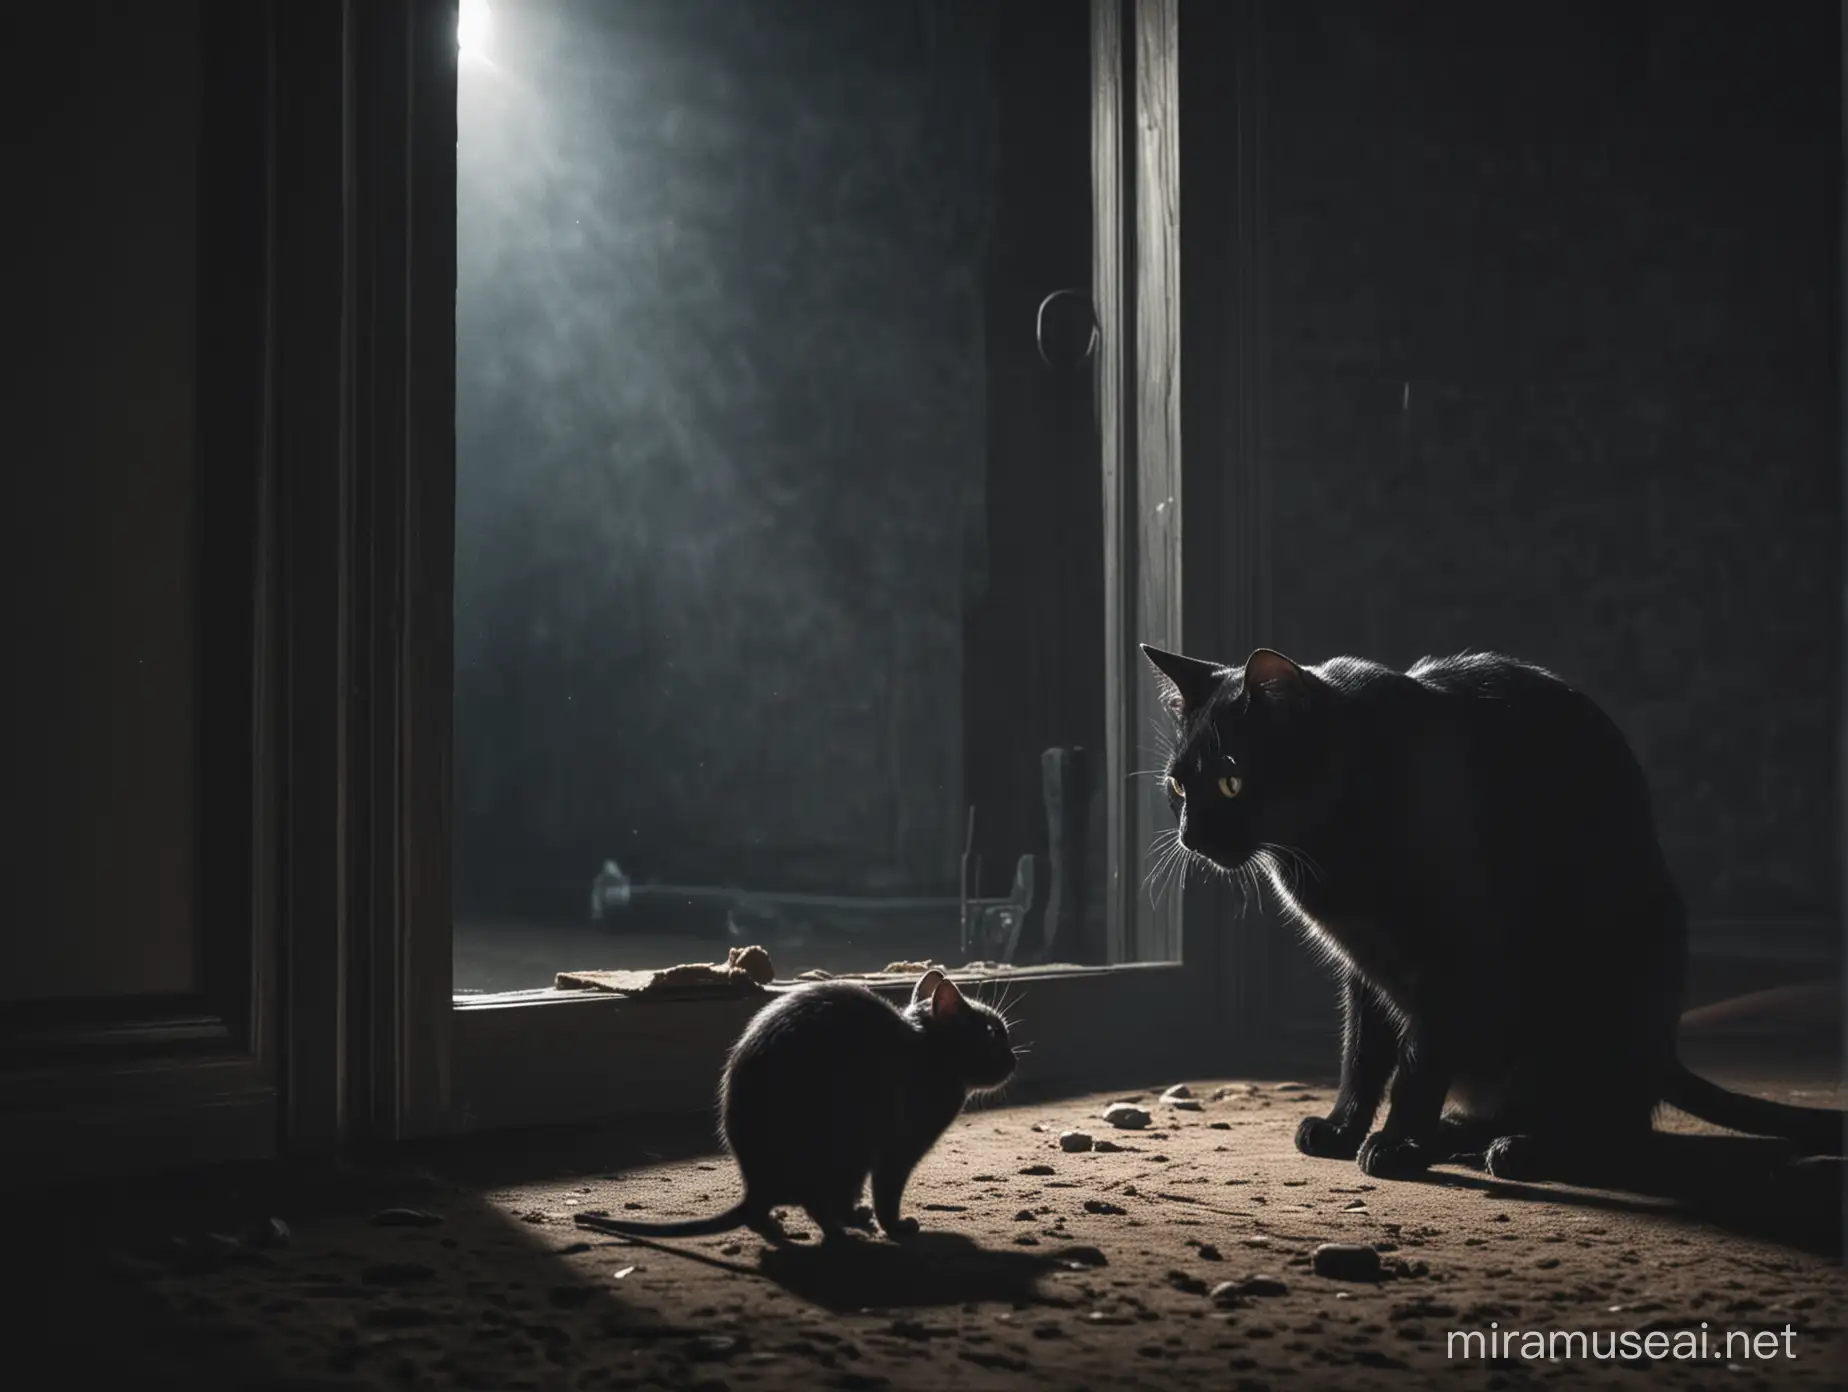 Nocturnal Encounter Black Cat Observing Mouse in Dimly Lit Room